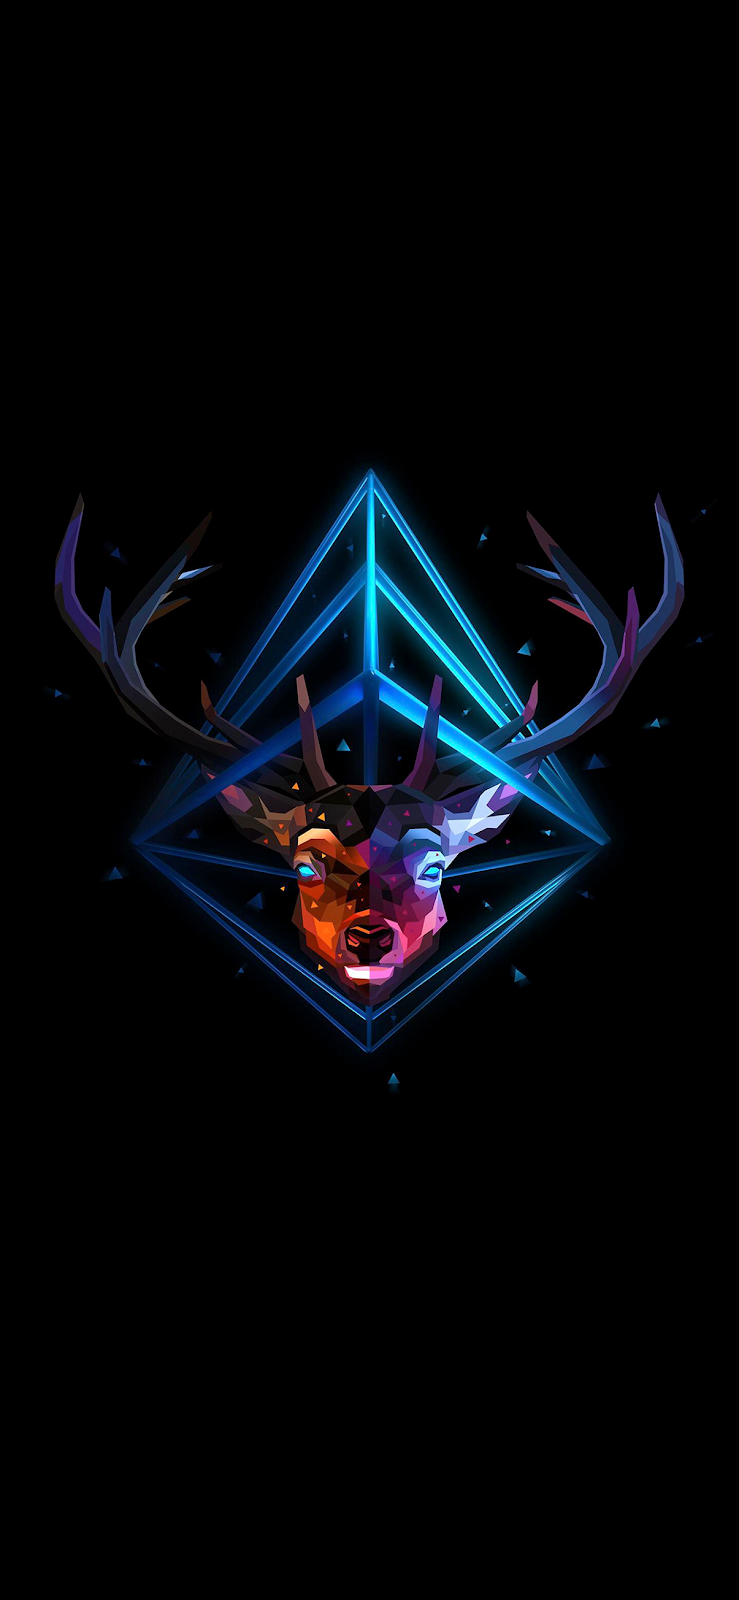 Polygonal Stag Head - Amoled Wallpaper For Pc , HD Wallpaper & Backgrounds